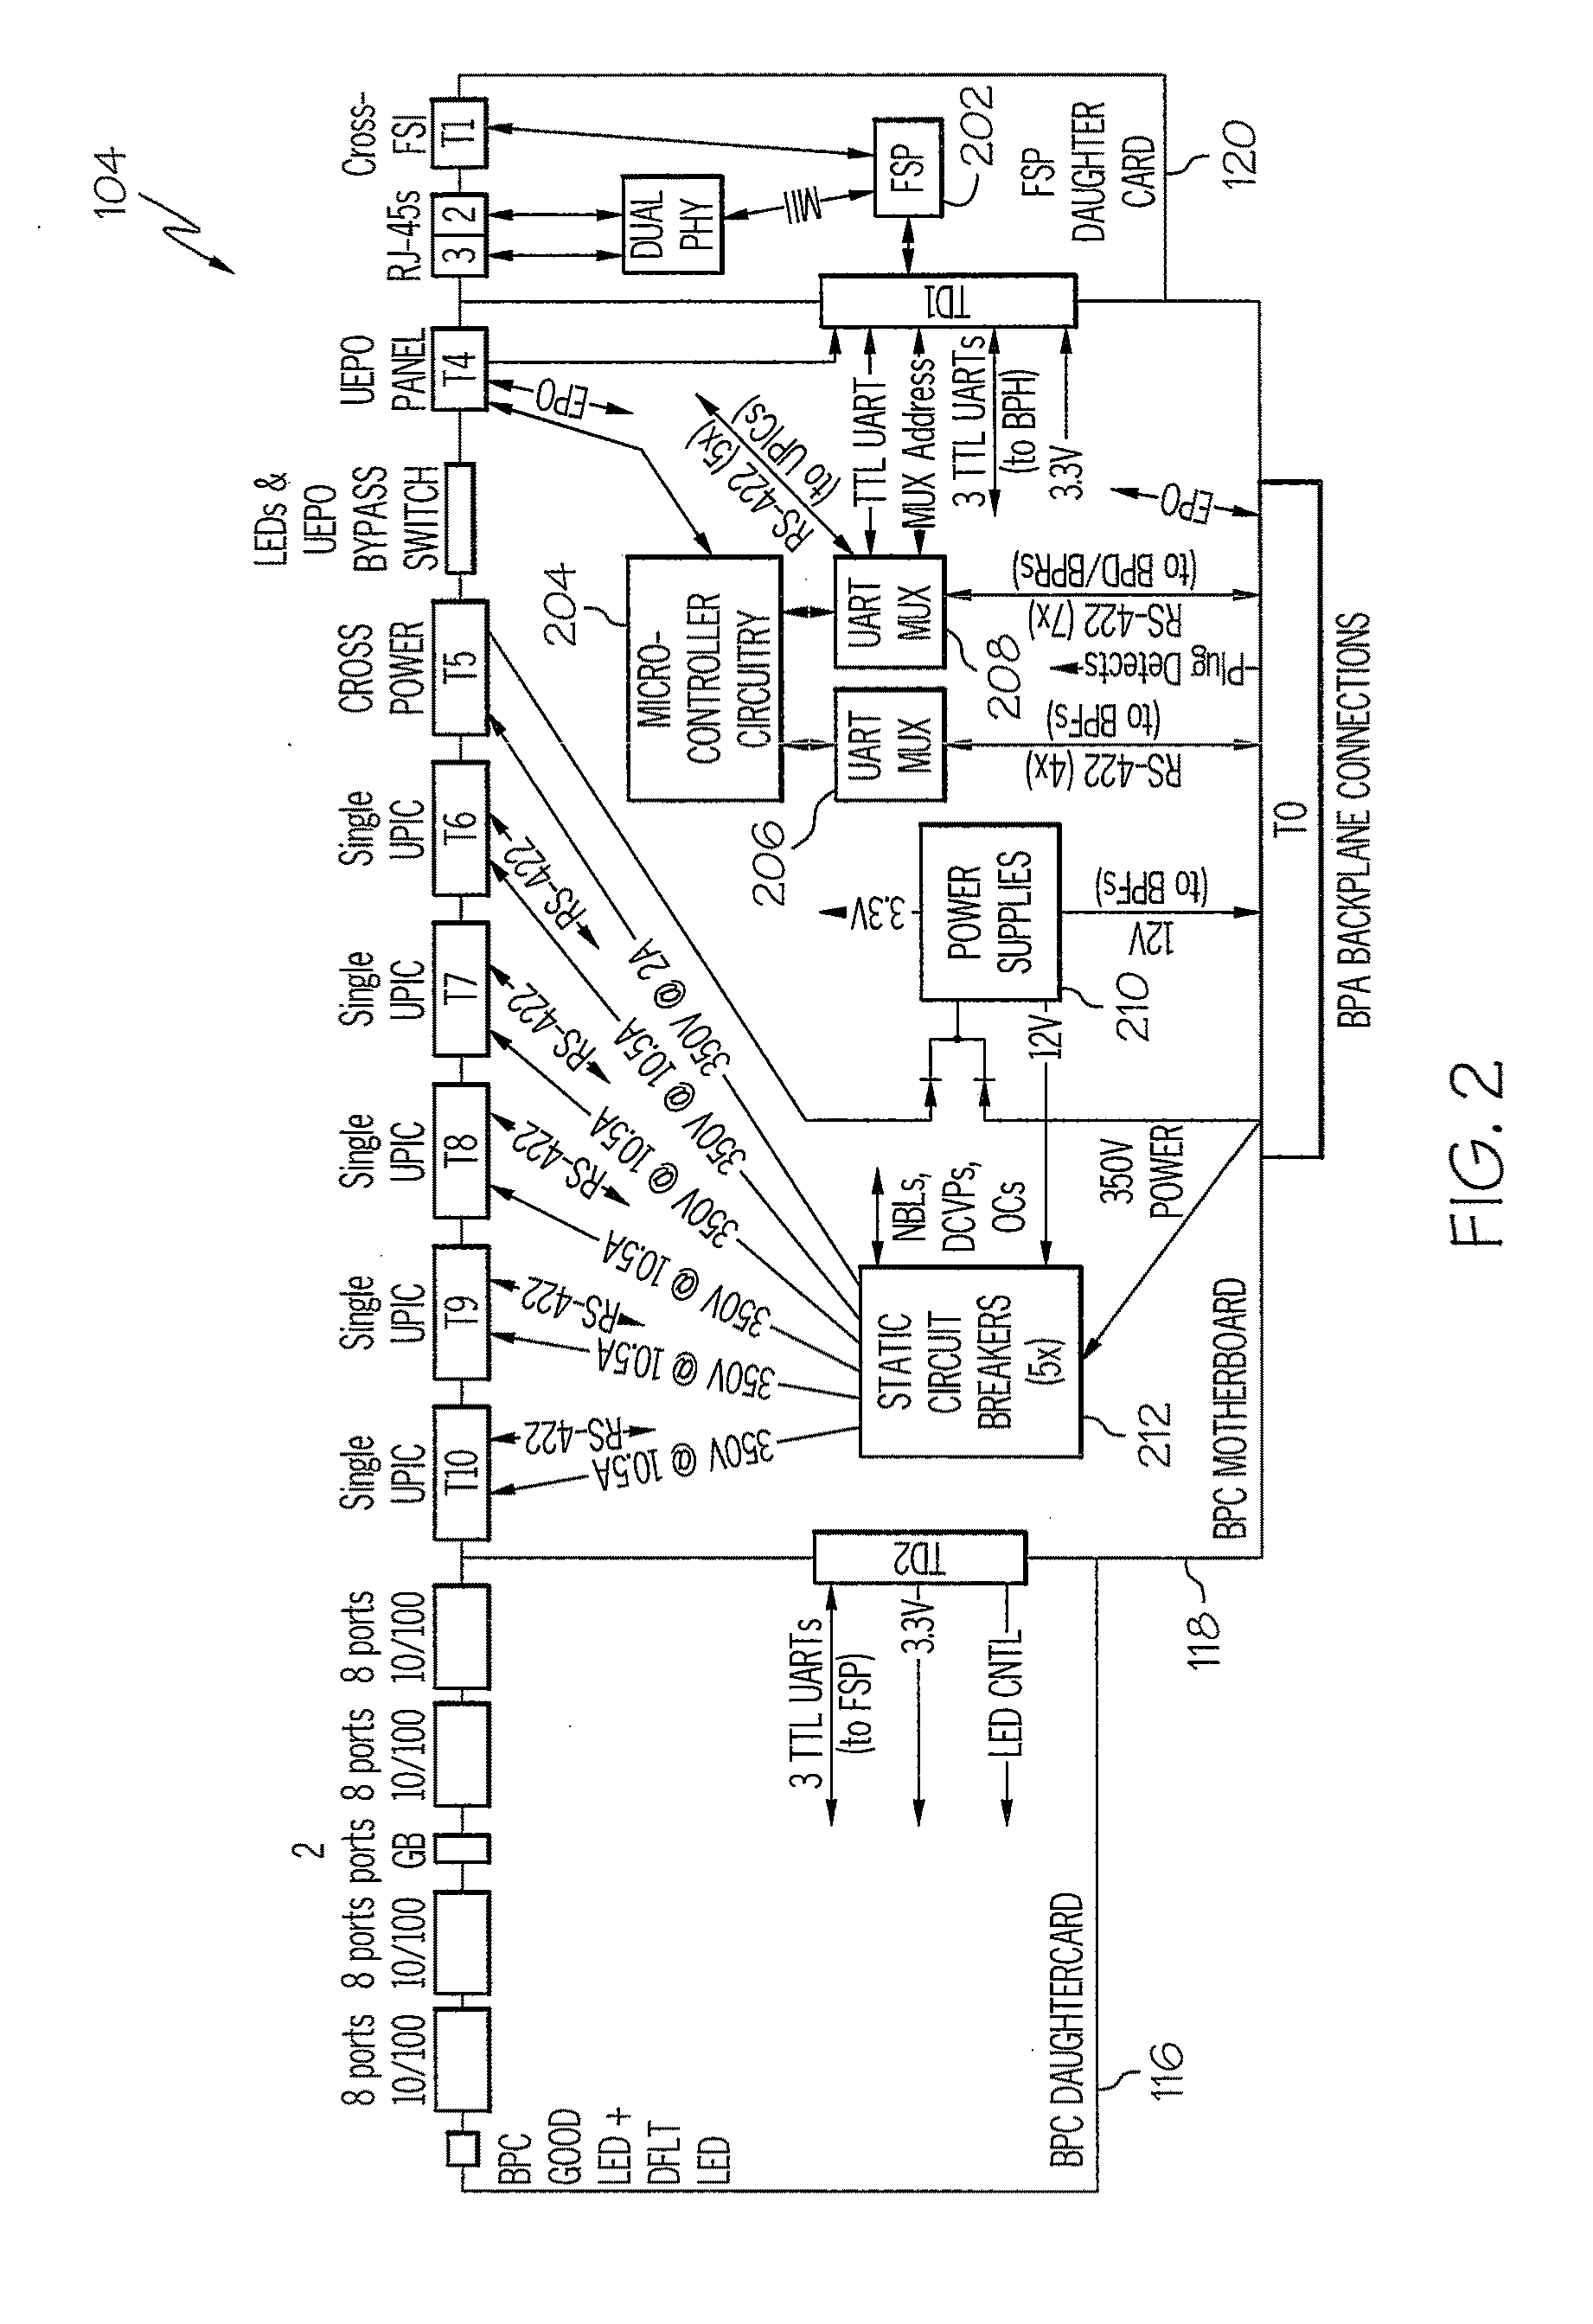 Power conversion, control, and distribution system